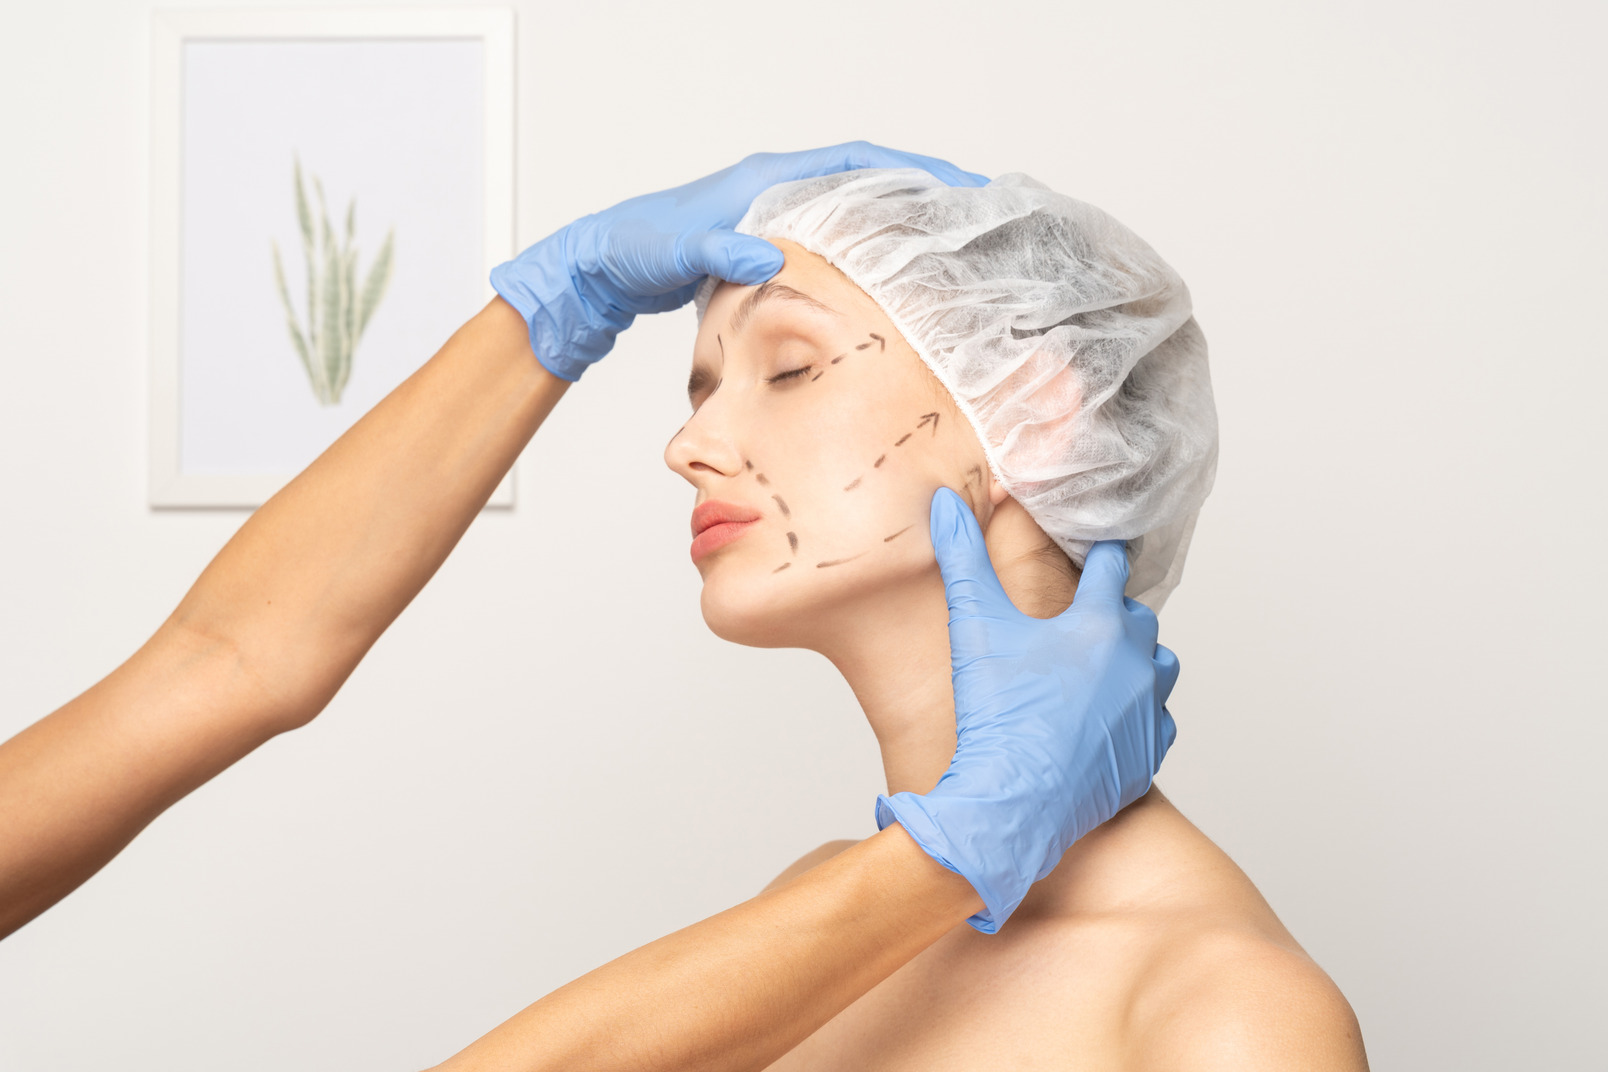 Young woman preparing for plastic surgery